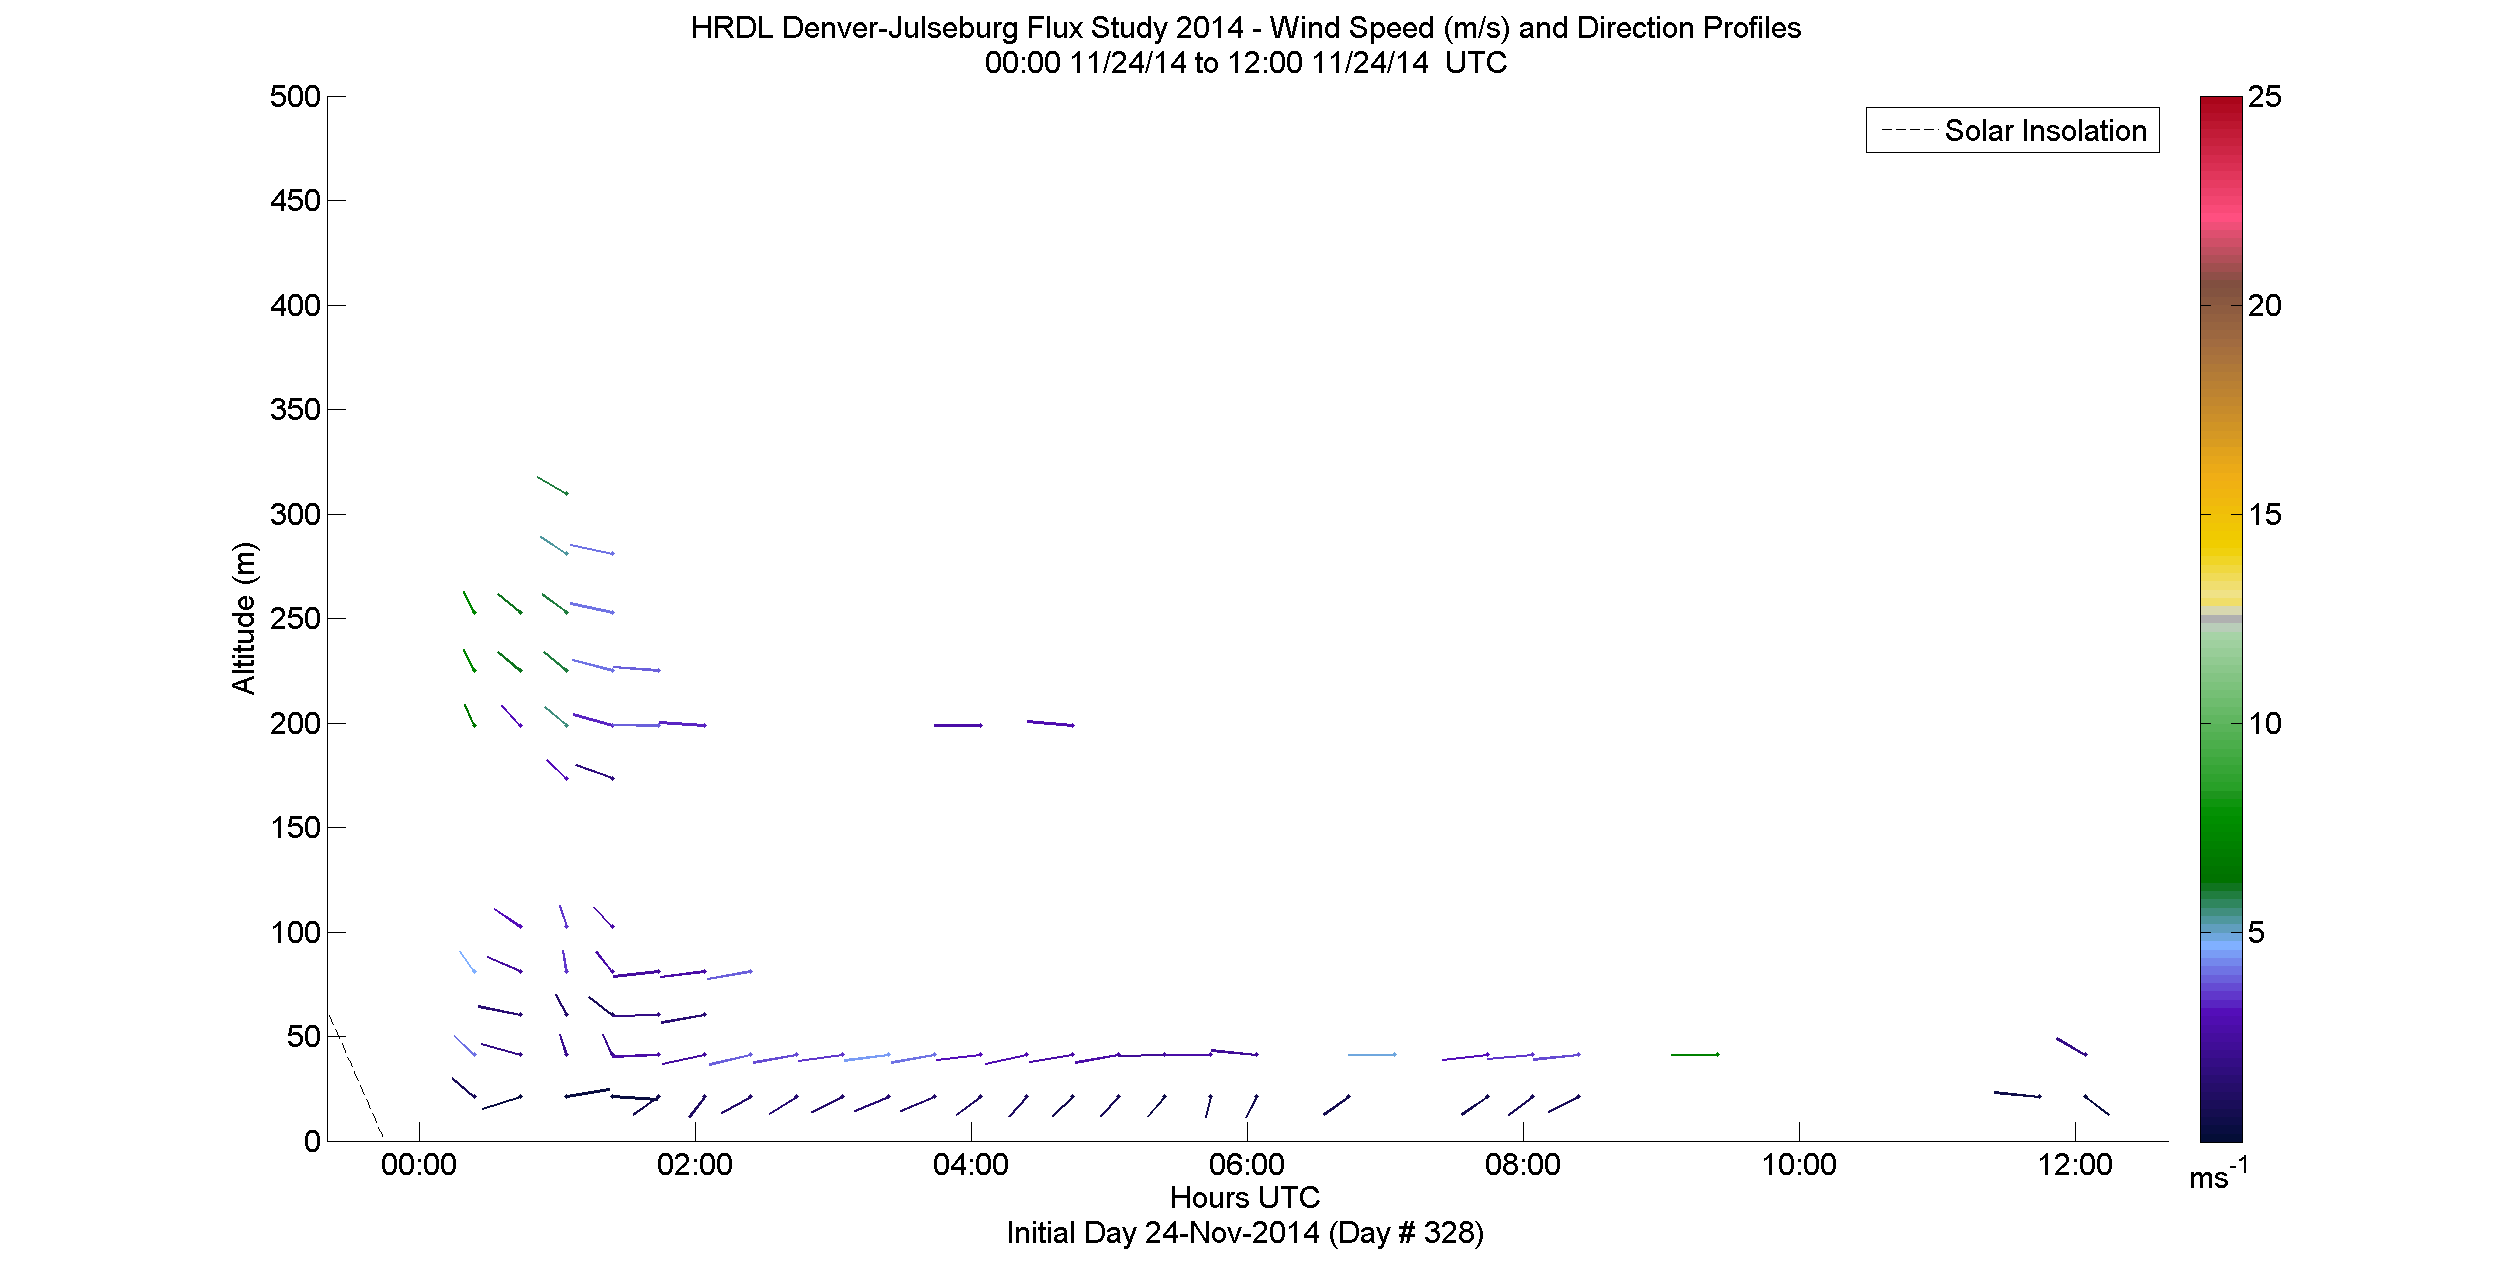 HRDL speed and direction profile - November 24 am